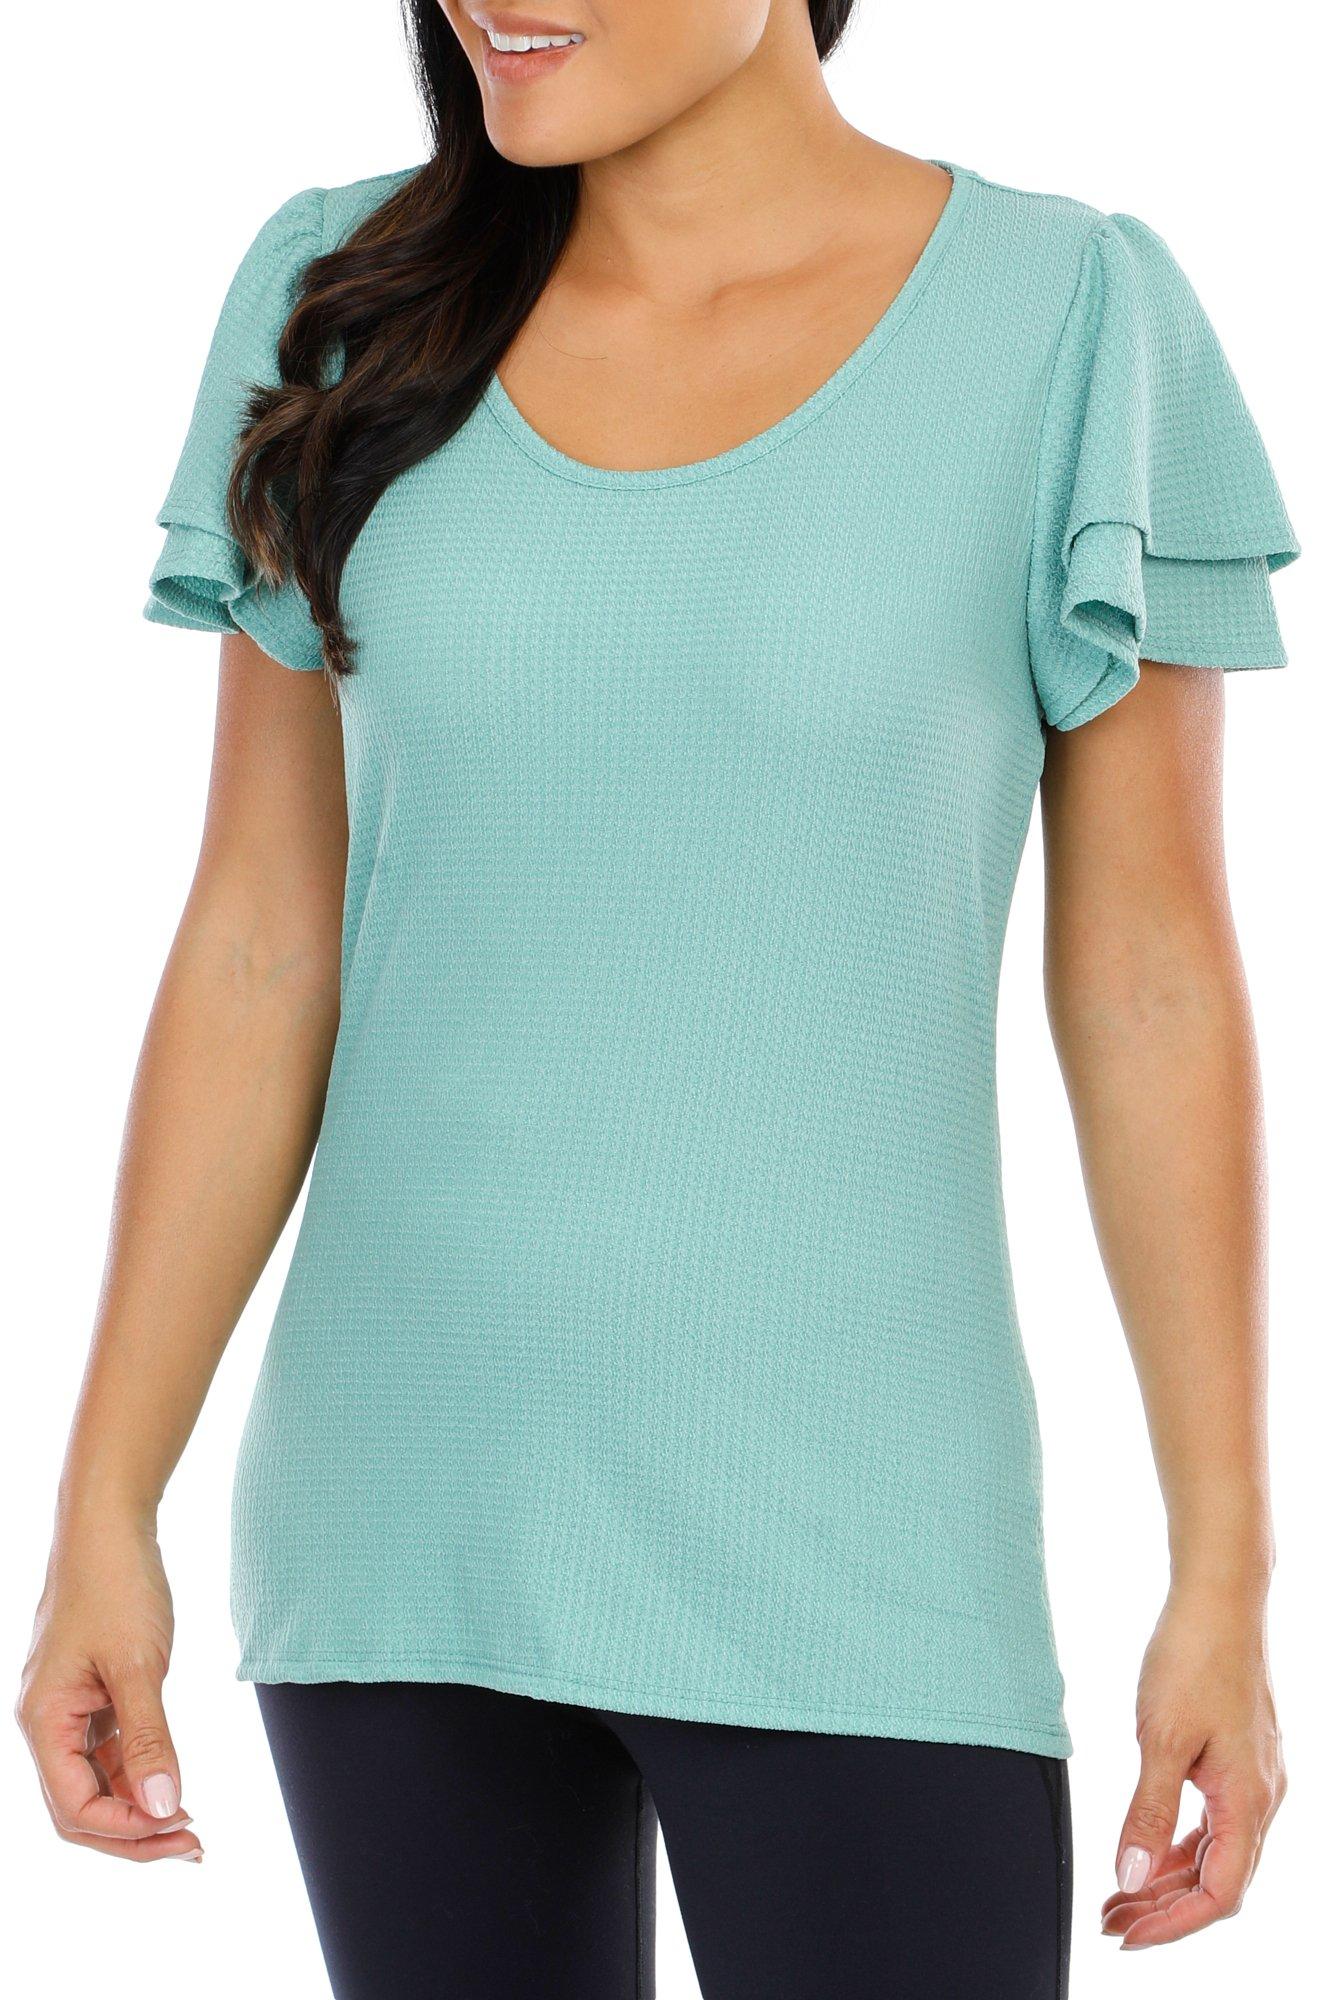 Women's Short Sleeve Solid Knit Top